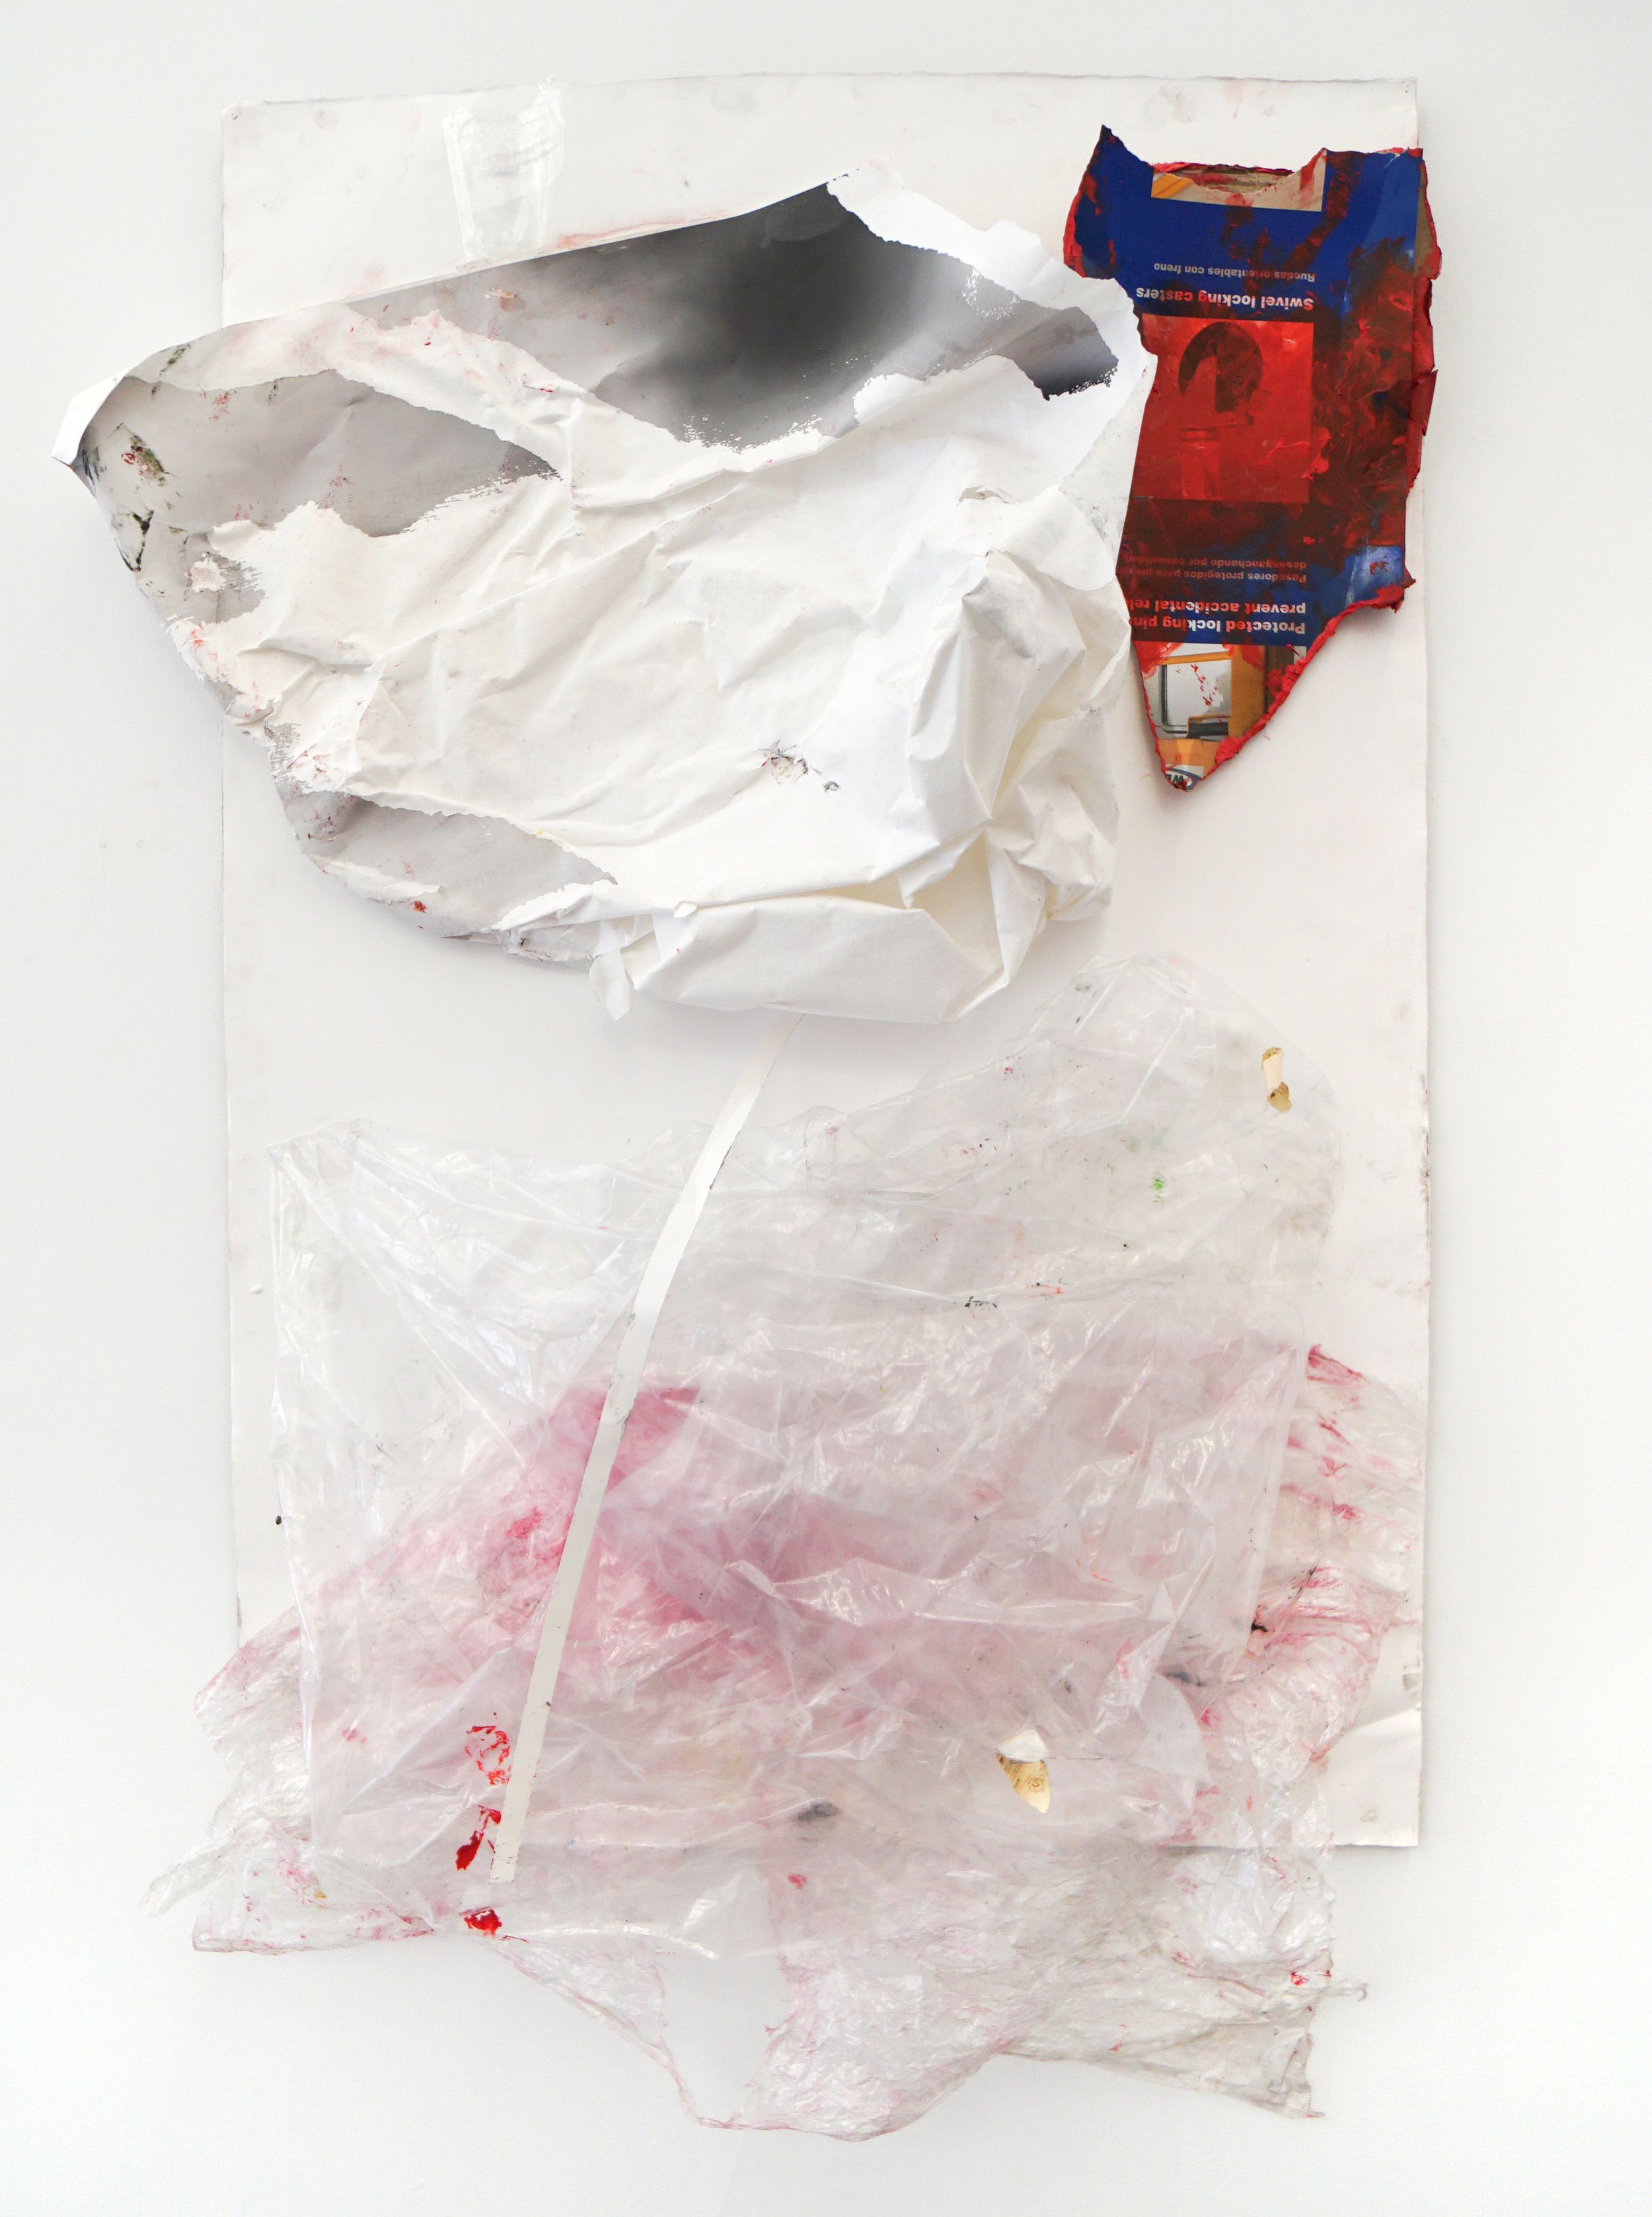  Jaymerson Payton  A Fading Memory , 2019 Plastic, glue, oil paint, and mixed media 48 x 30 inches 